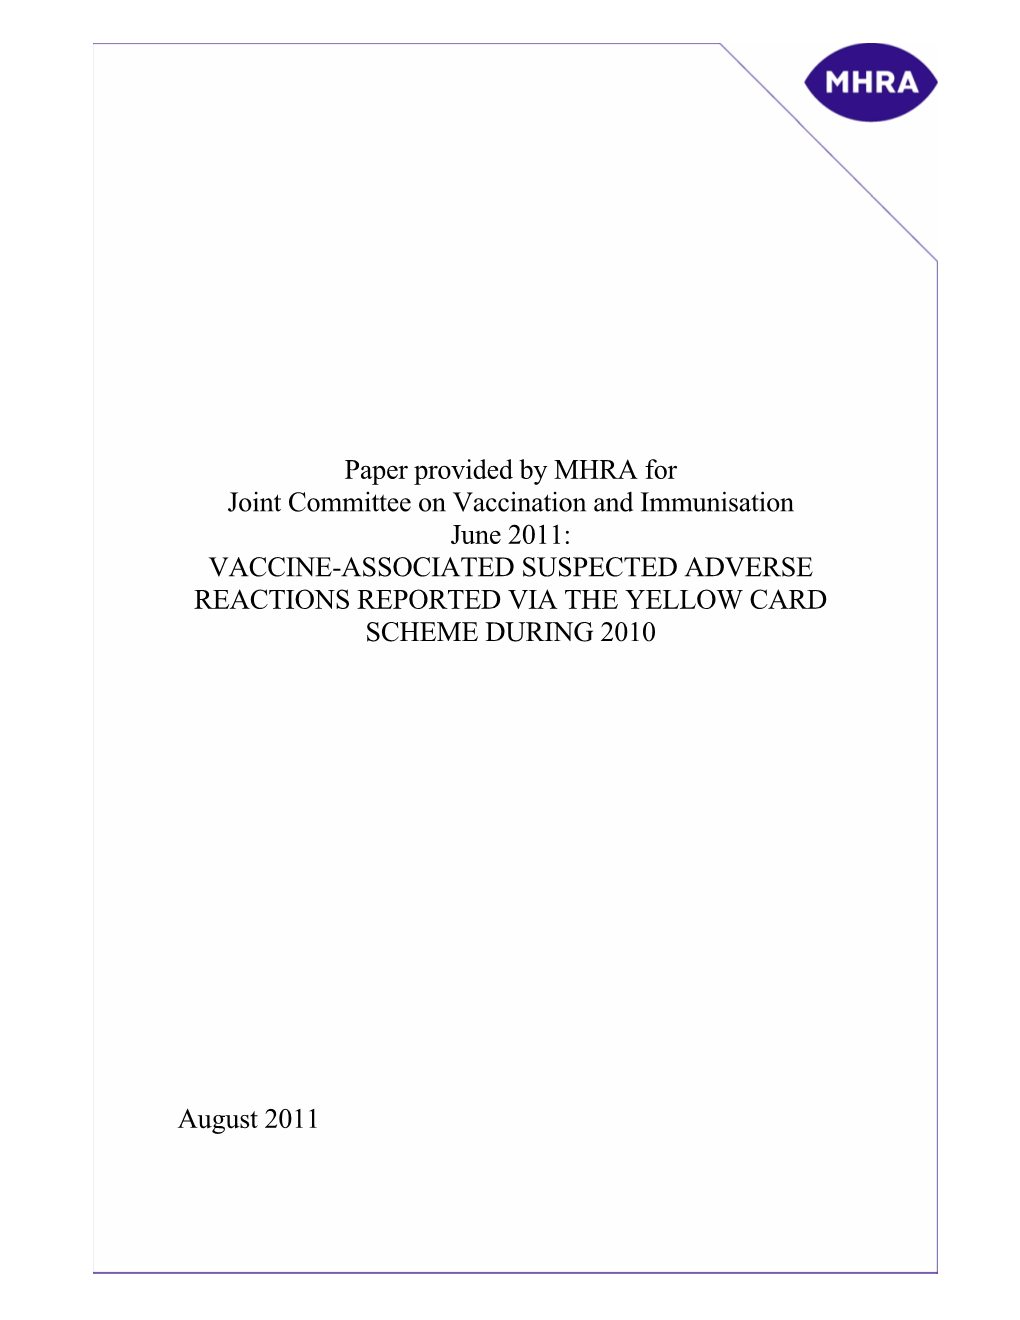 Paper Provided by MHRA for Joint Committee On